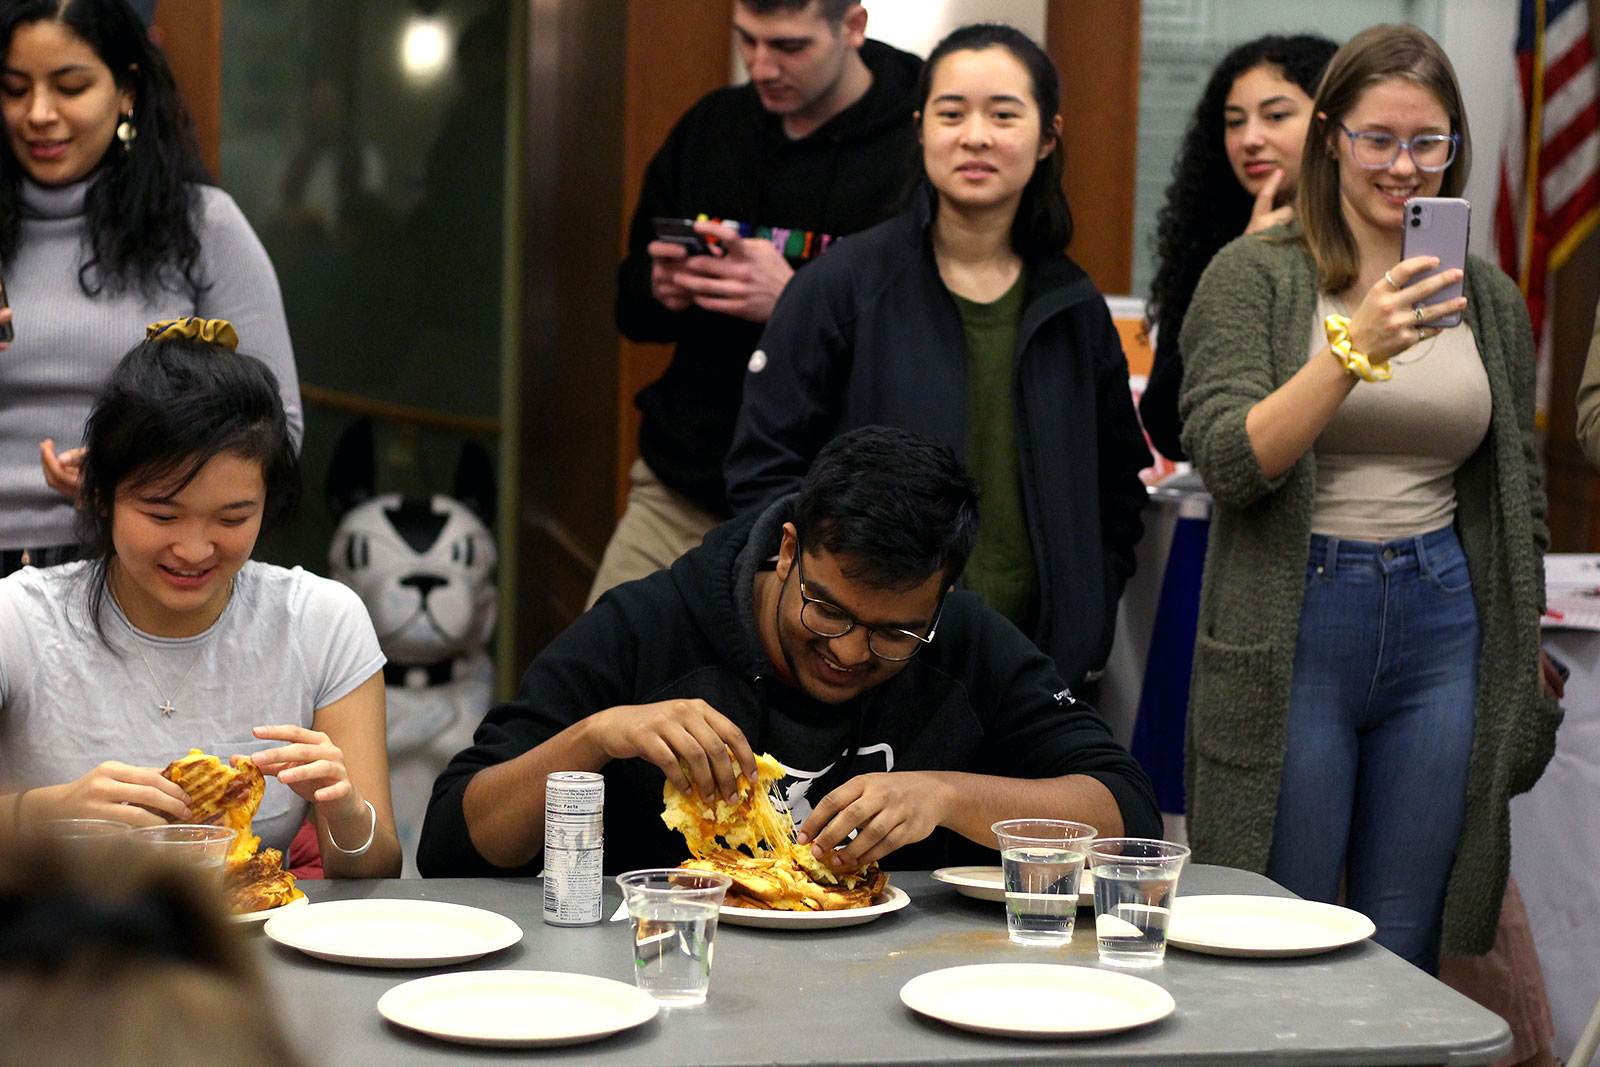 BU groups host grilled cheese eating contest for prizes and charitable